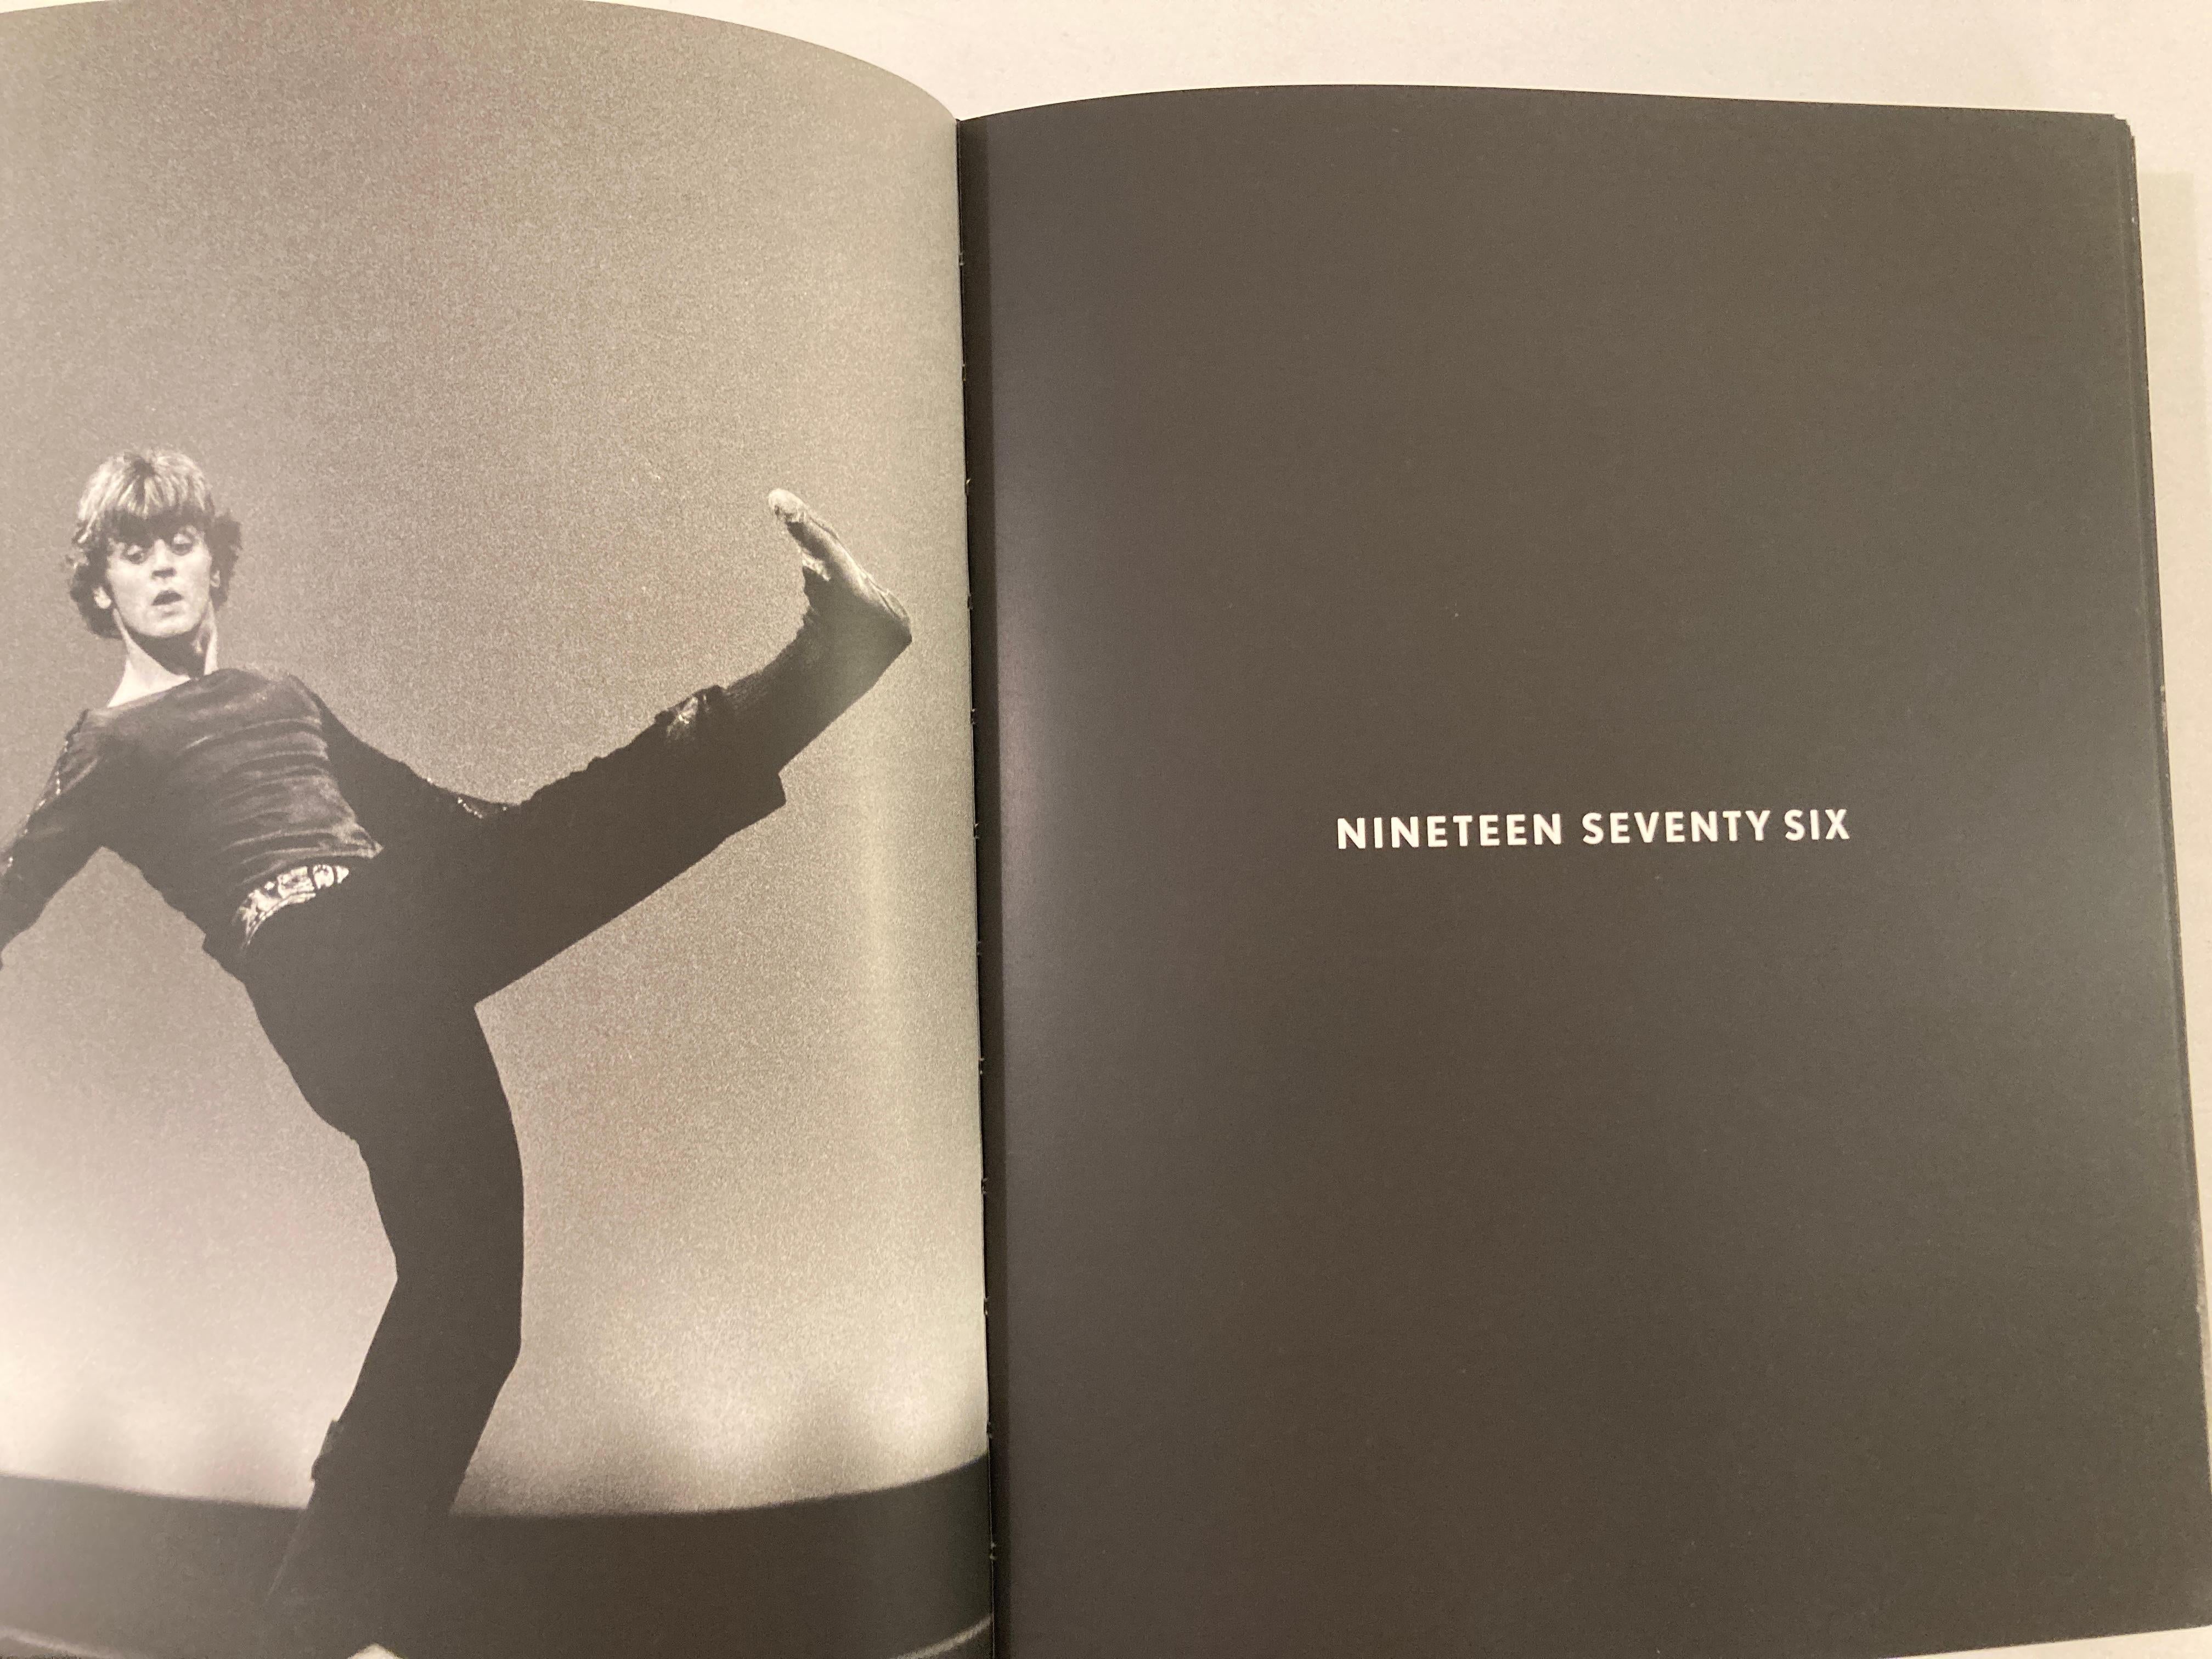 Paper Baryshnikov in Back and White by Mikhail Baryshnikov Collectible Art Book For Sale